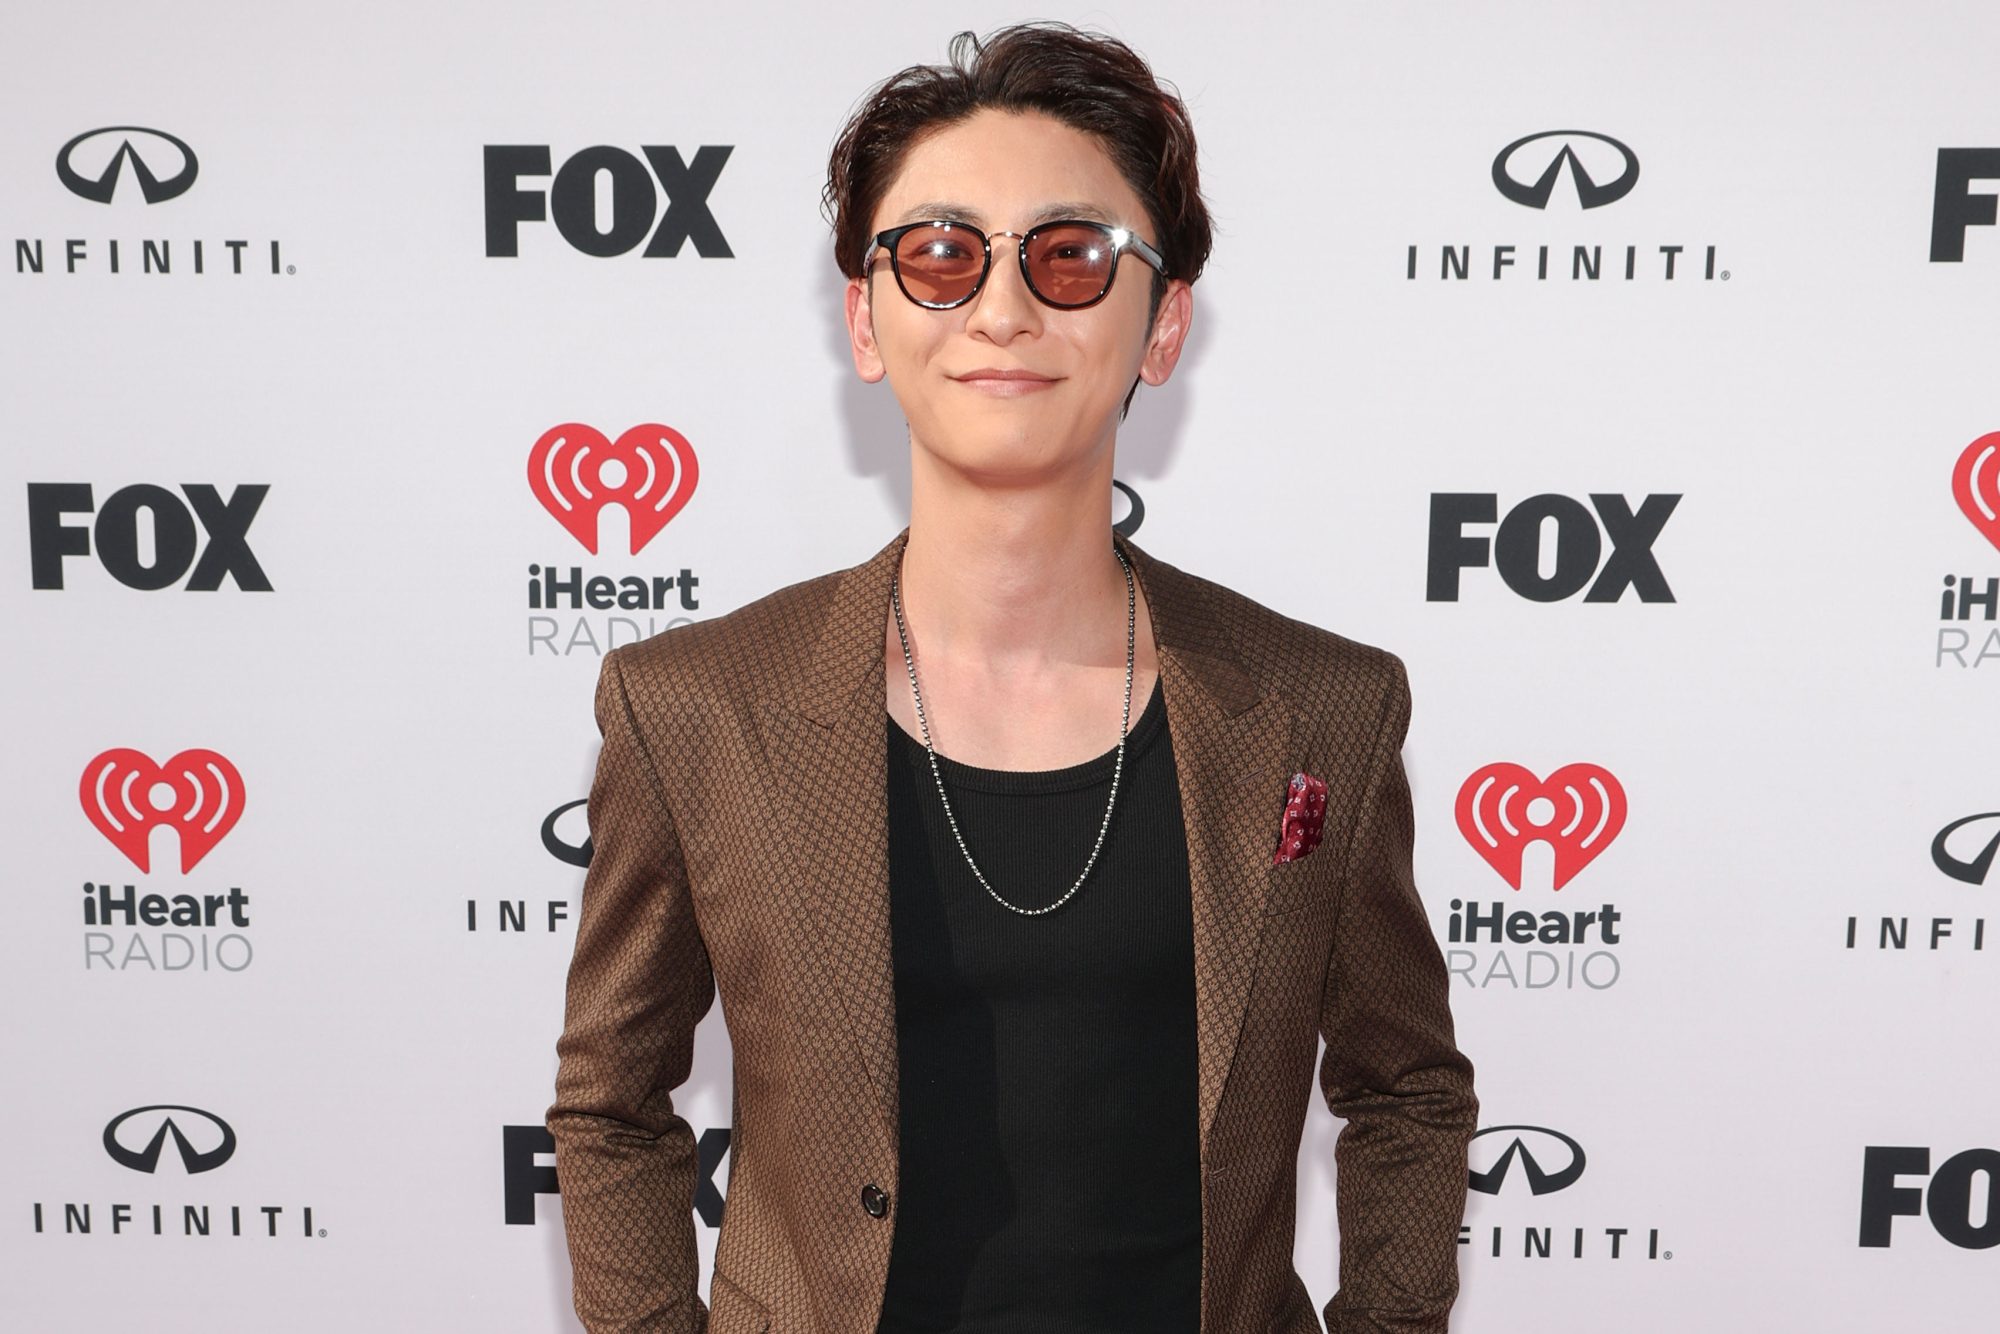 Shinjiro Atae at the 2023 iHeartRadio Music Awards held at The Dolby Theatre on March 27, 2023 in Los Angeles, California. (Photo by Christopher Polk/Variety via Getty Images)